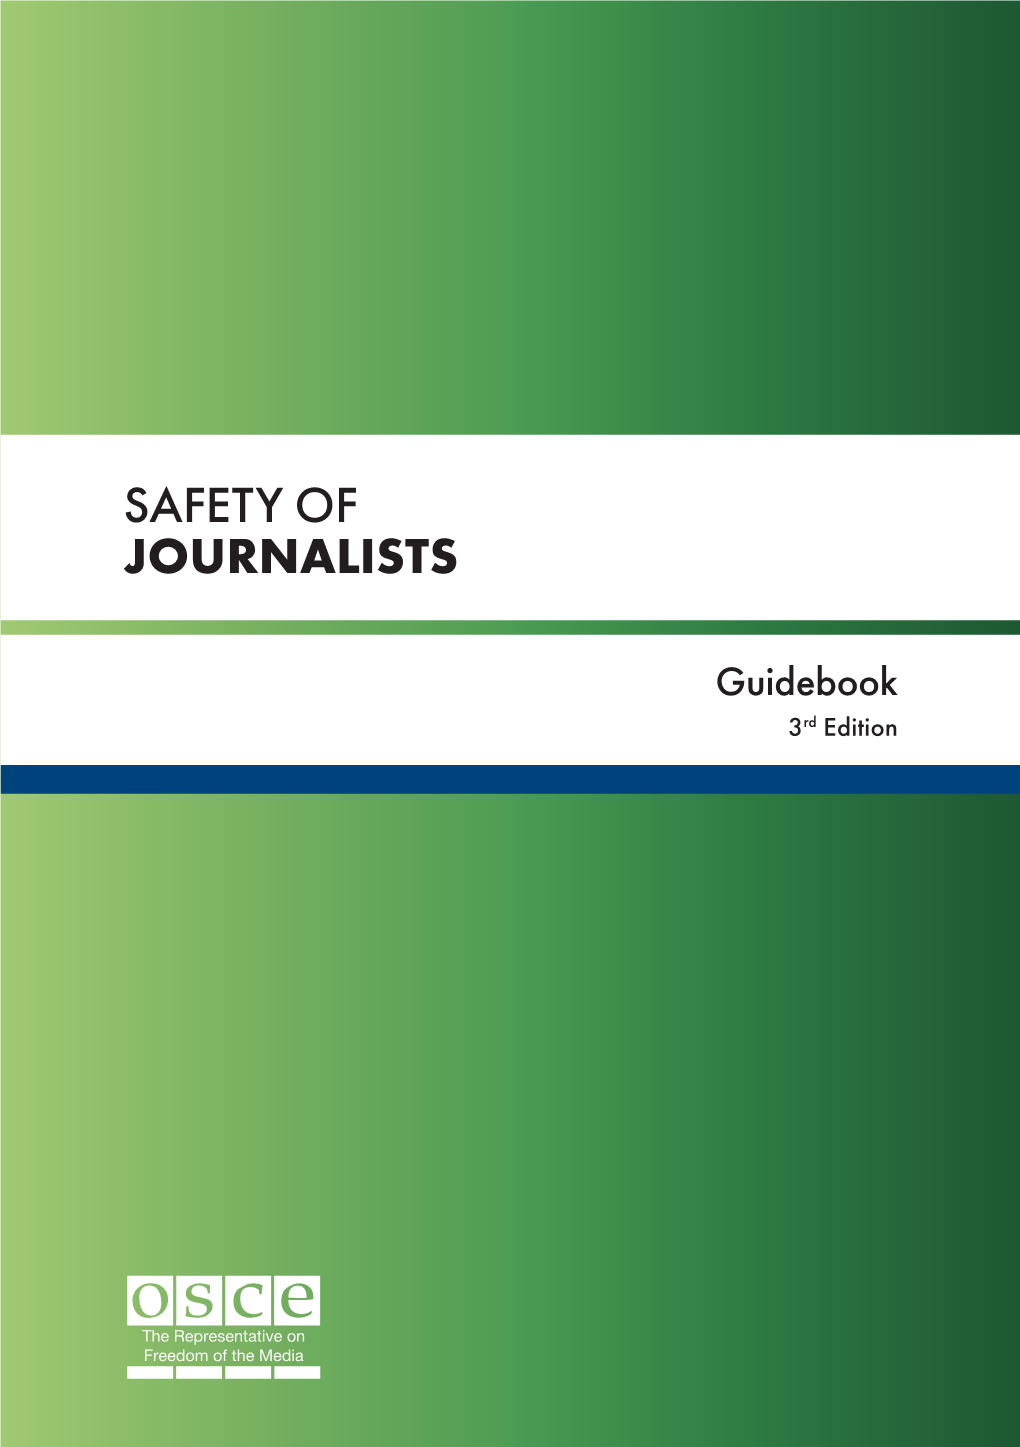 Safety of Journalists